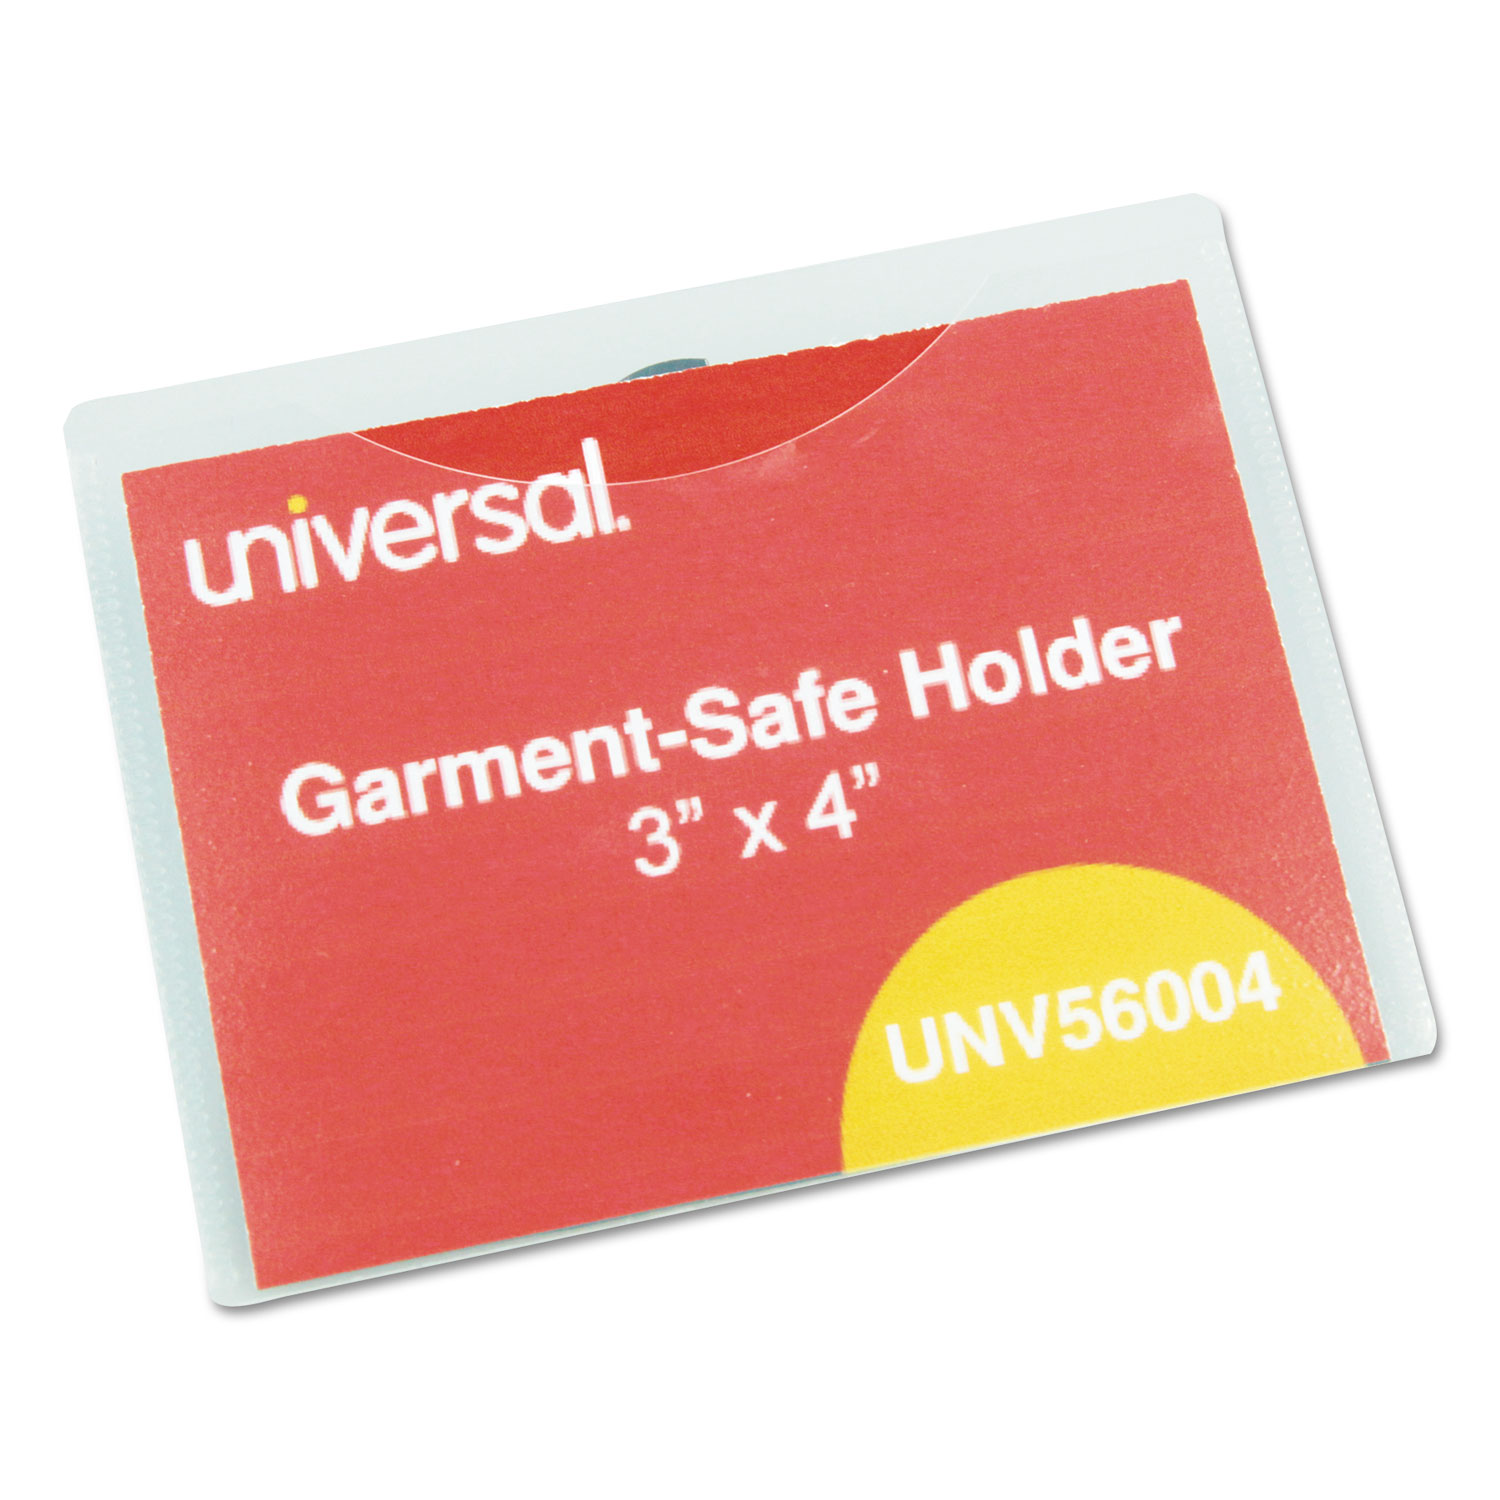  Universal UNV56004 Clear Badge Holders w/Garment-Safe Clips, 3 x 4, White Inserts, 50/Box (UNV56004) 